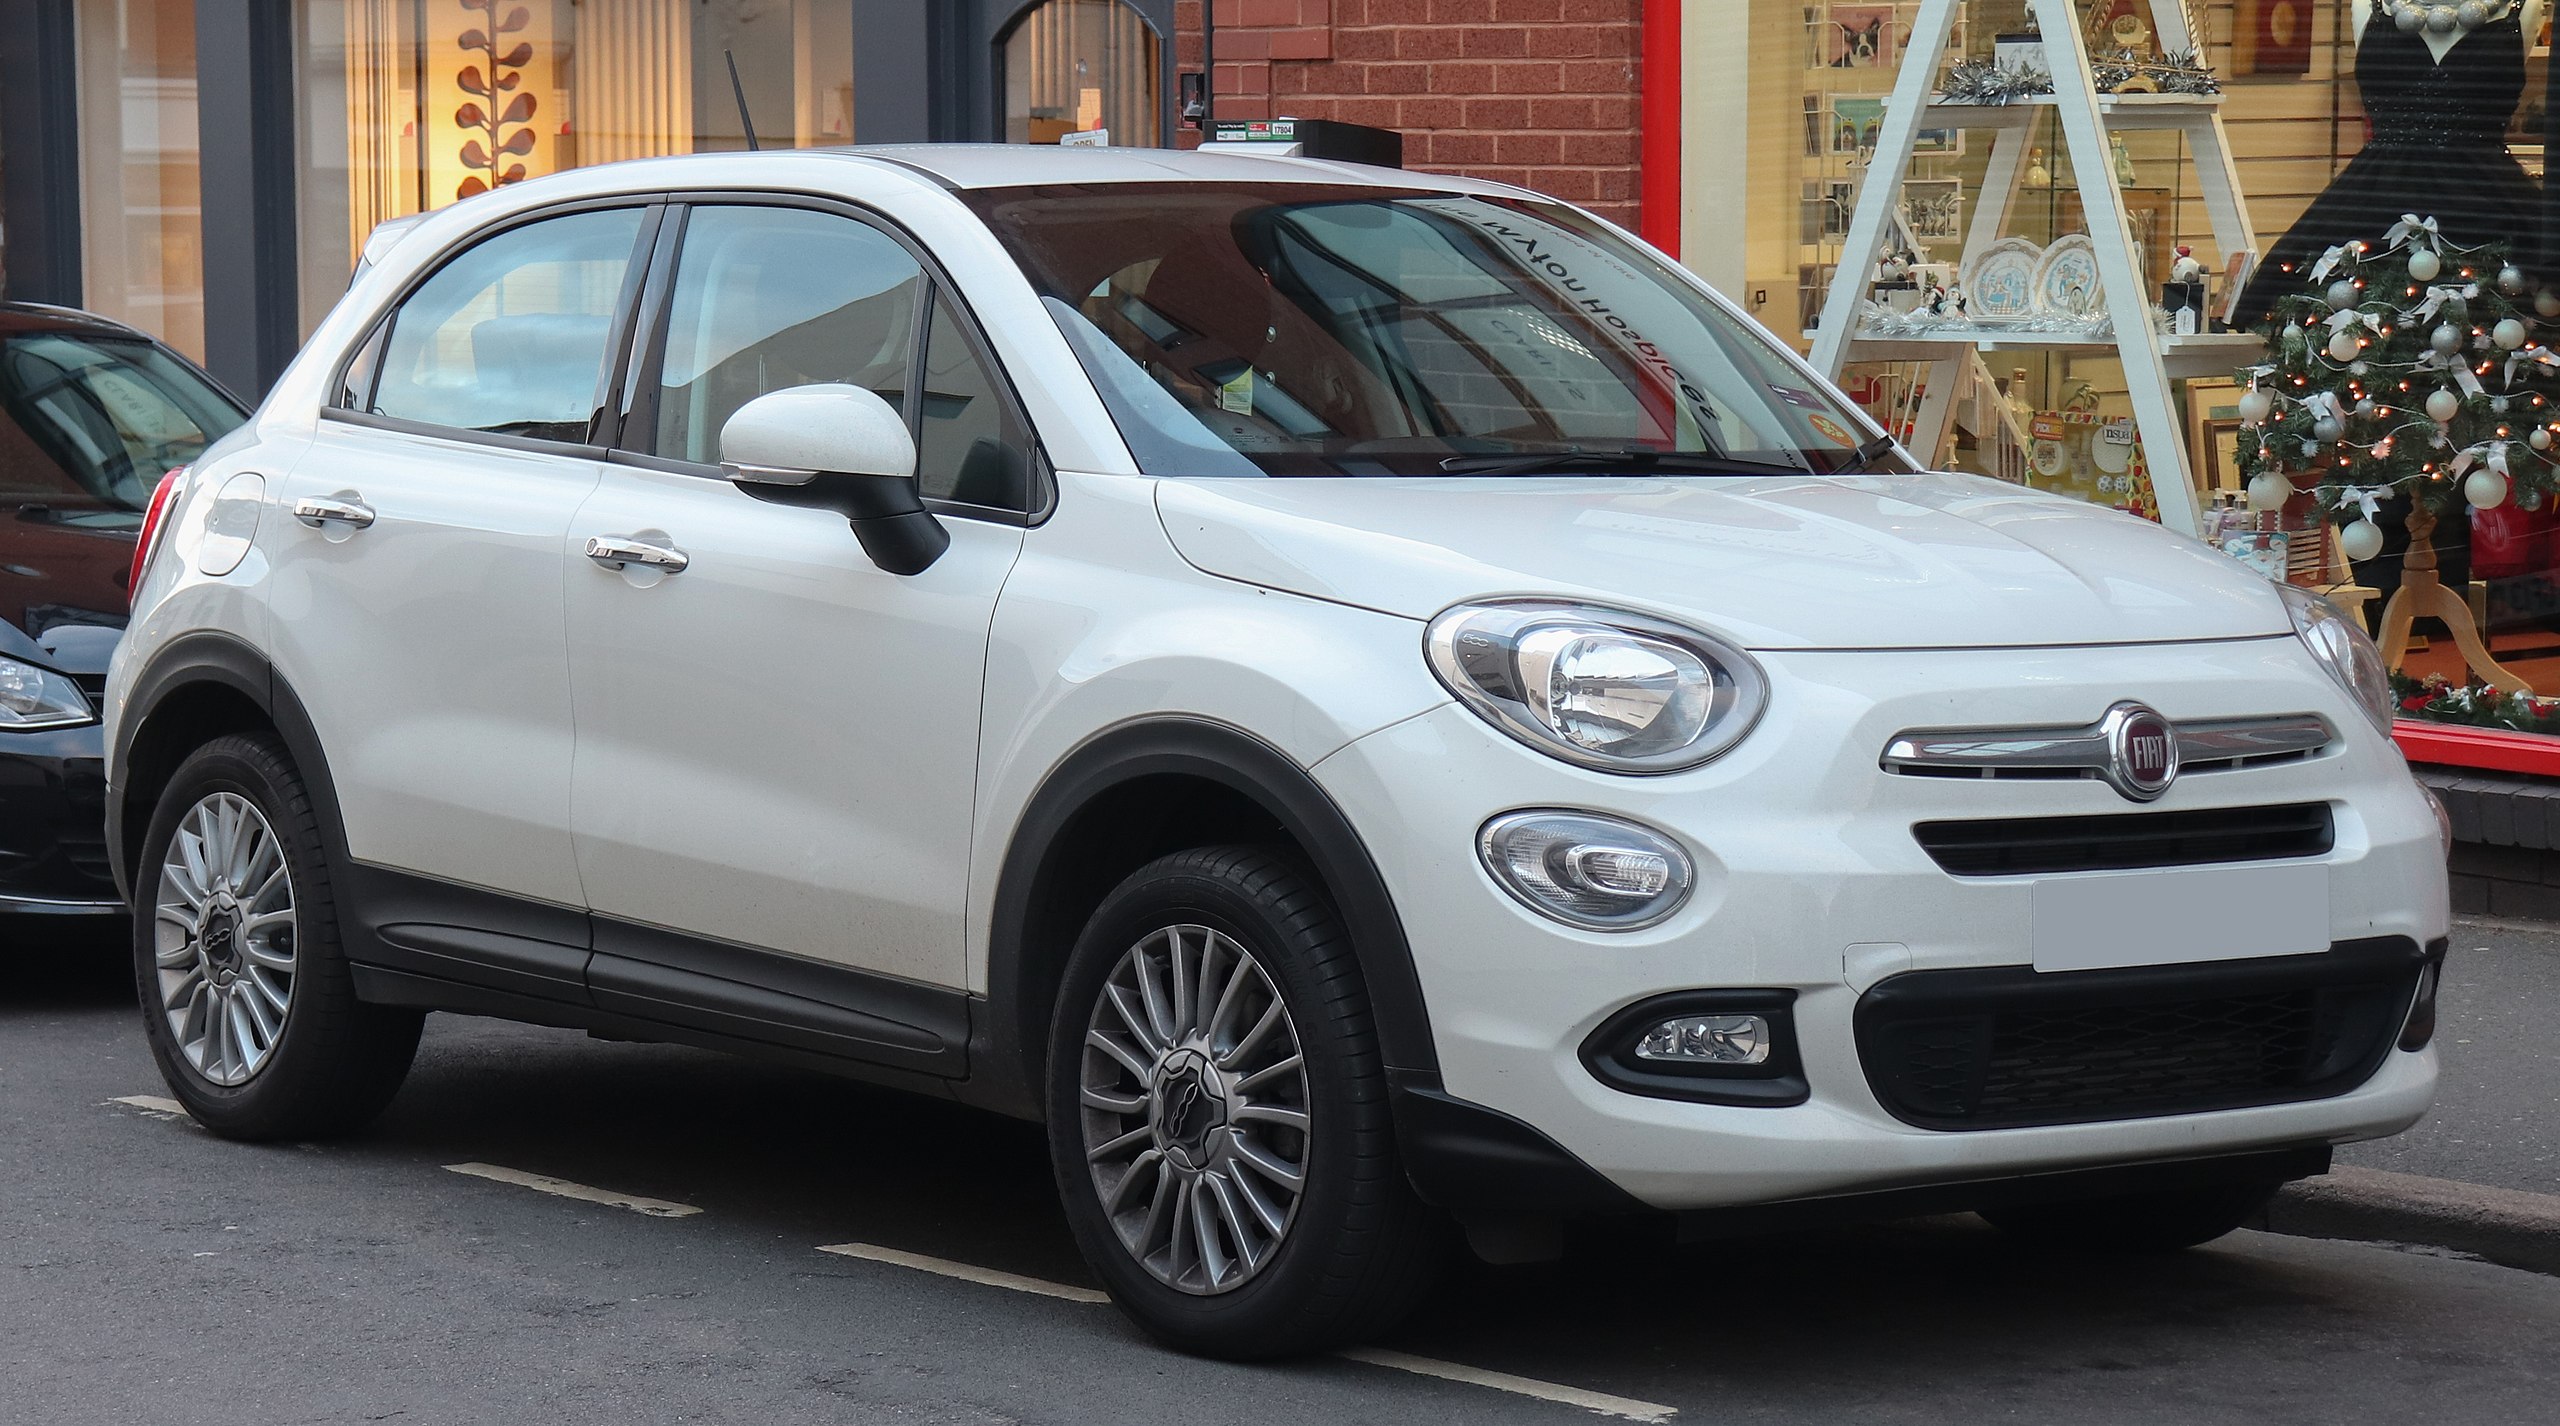 Frontier Stolthed Desperat File:2017 Fiat 500X POP Star Multiair 1.4 Front.jpg - Wikimedia Commons